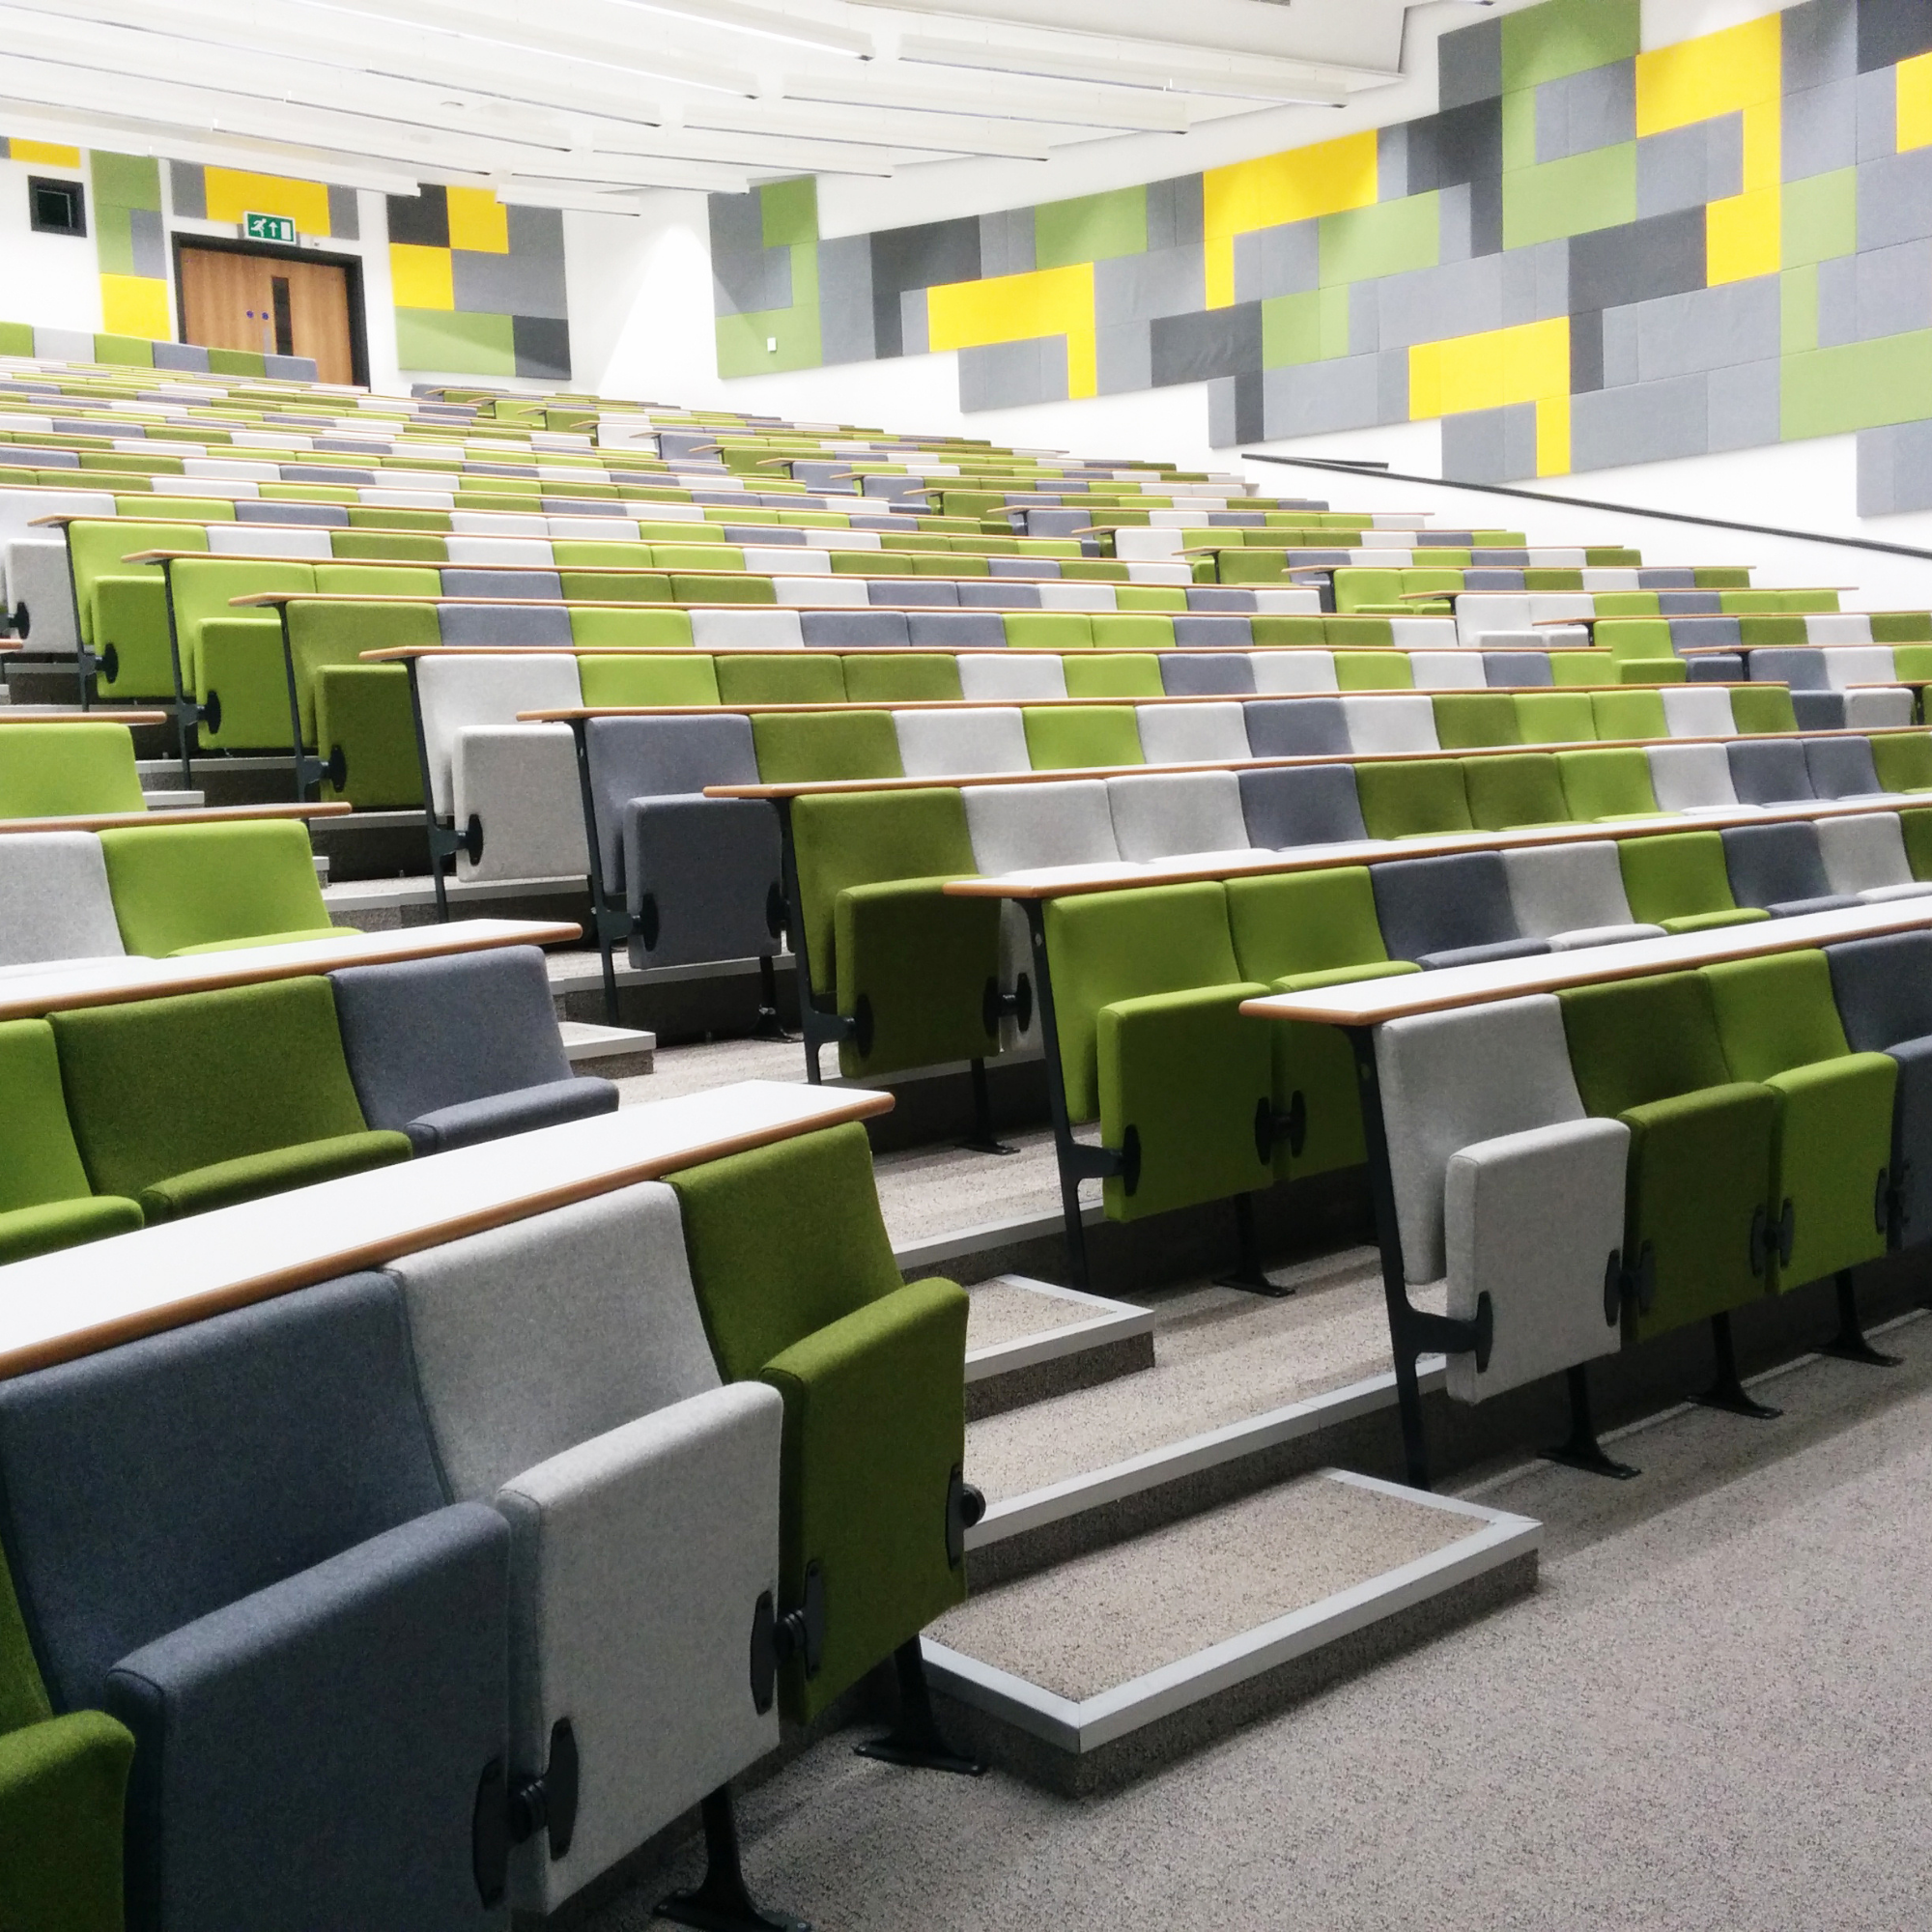 Grey and green auditorium seating in an auditorium.